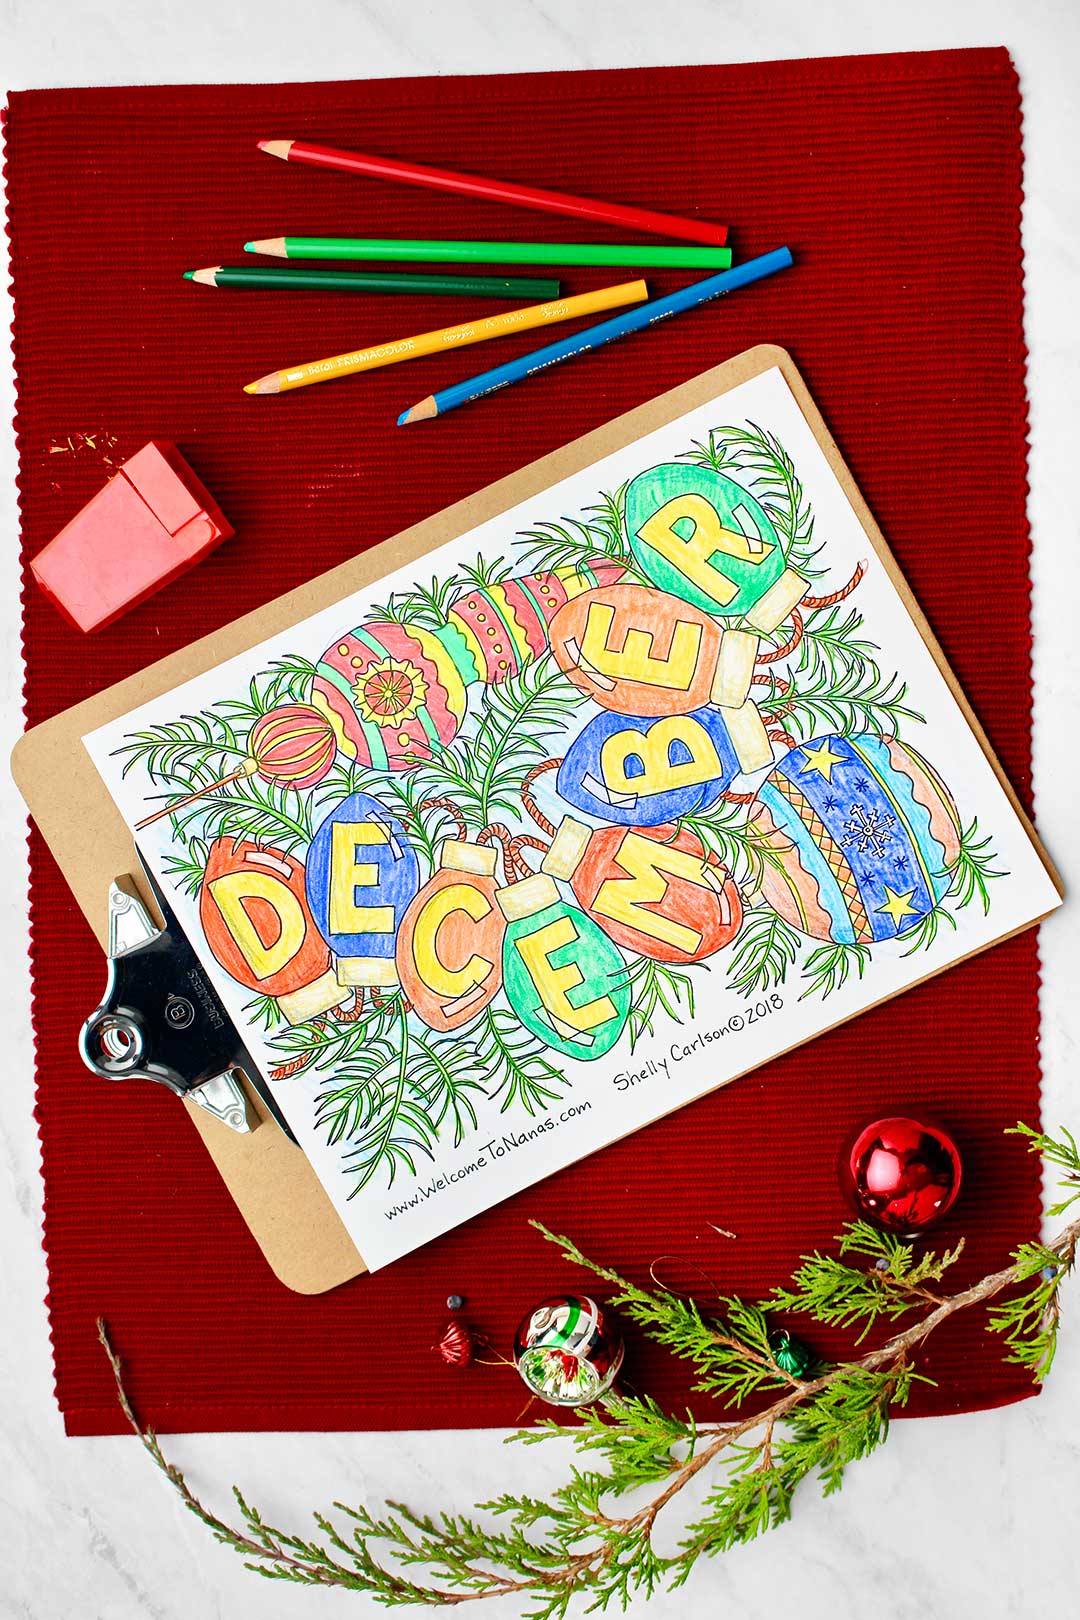 Finished December coloring page resting on a red placemat with holiday decorations and colored pencils.